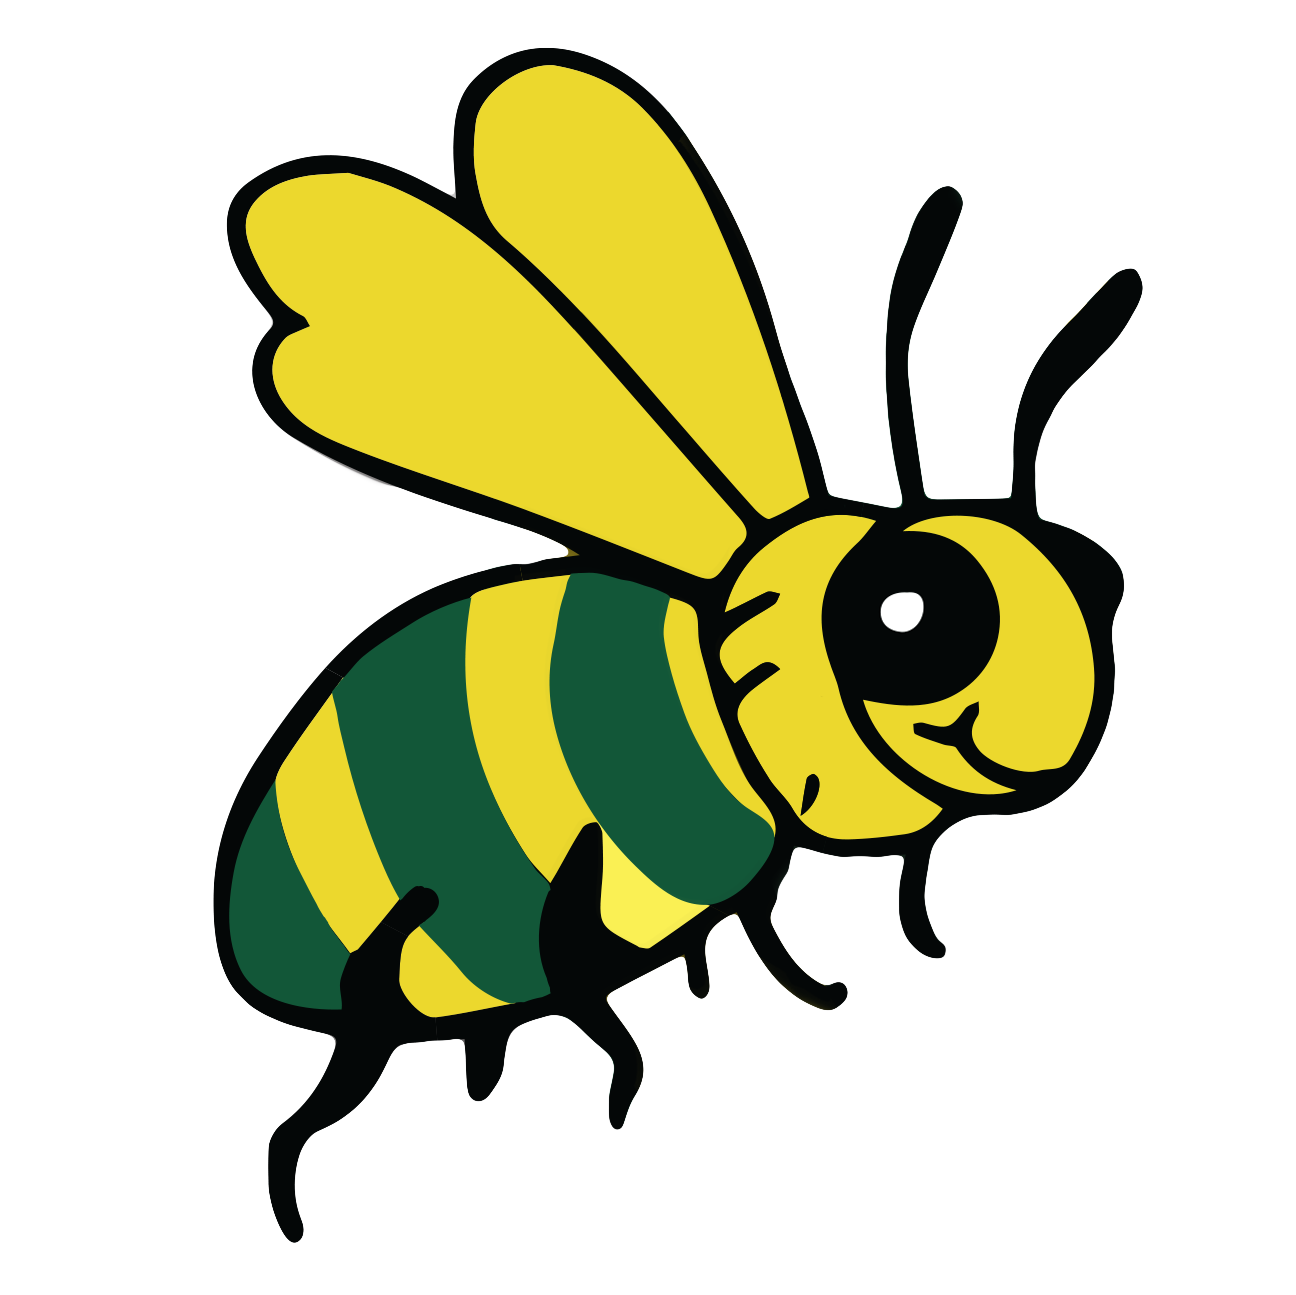 Billy the Bee - he is our Wheathampstead mascot - encouraging people to Buy It Locally